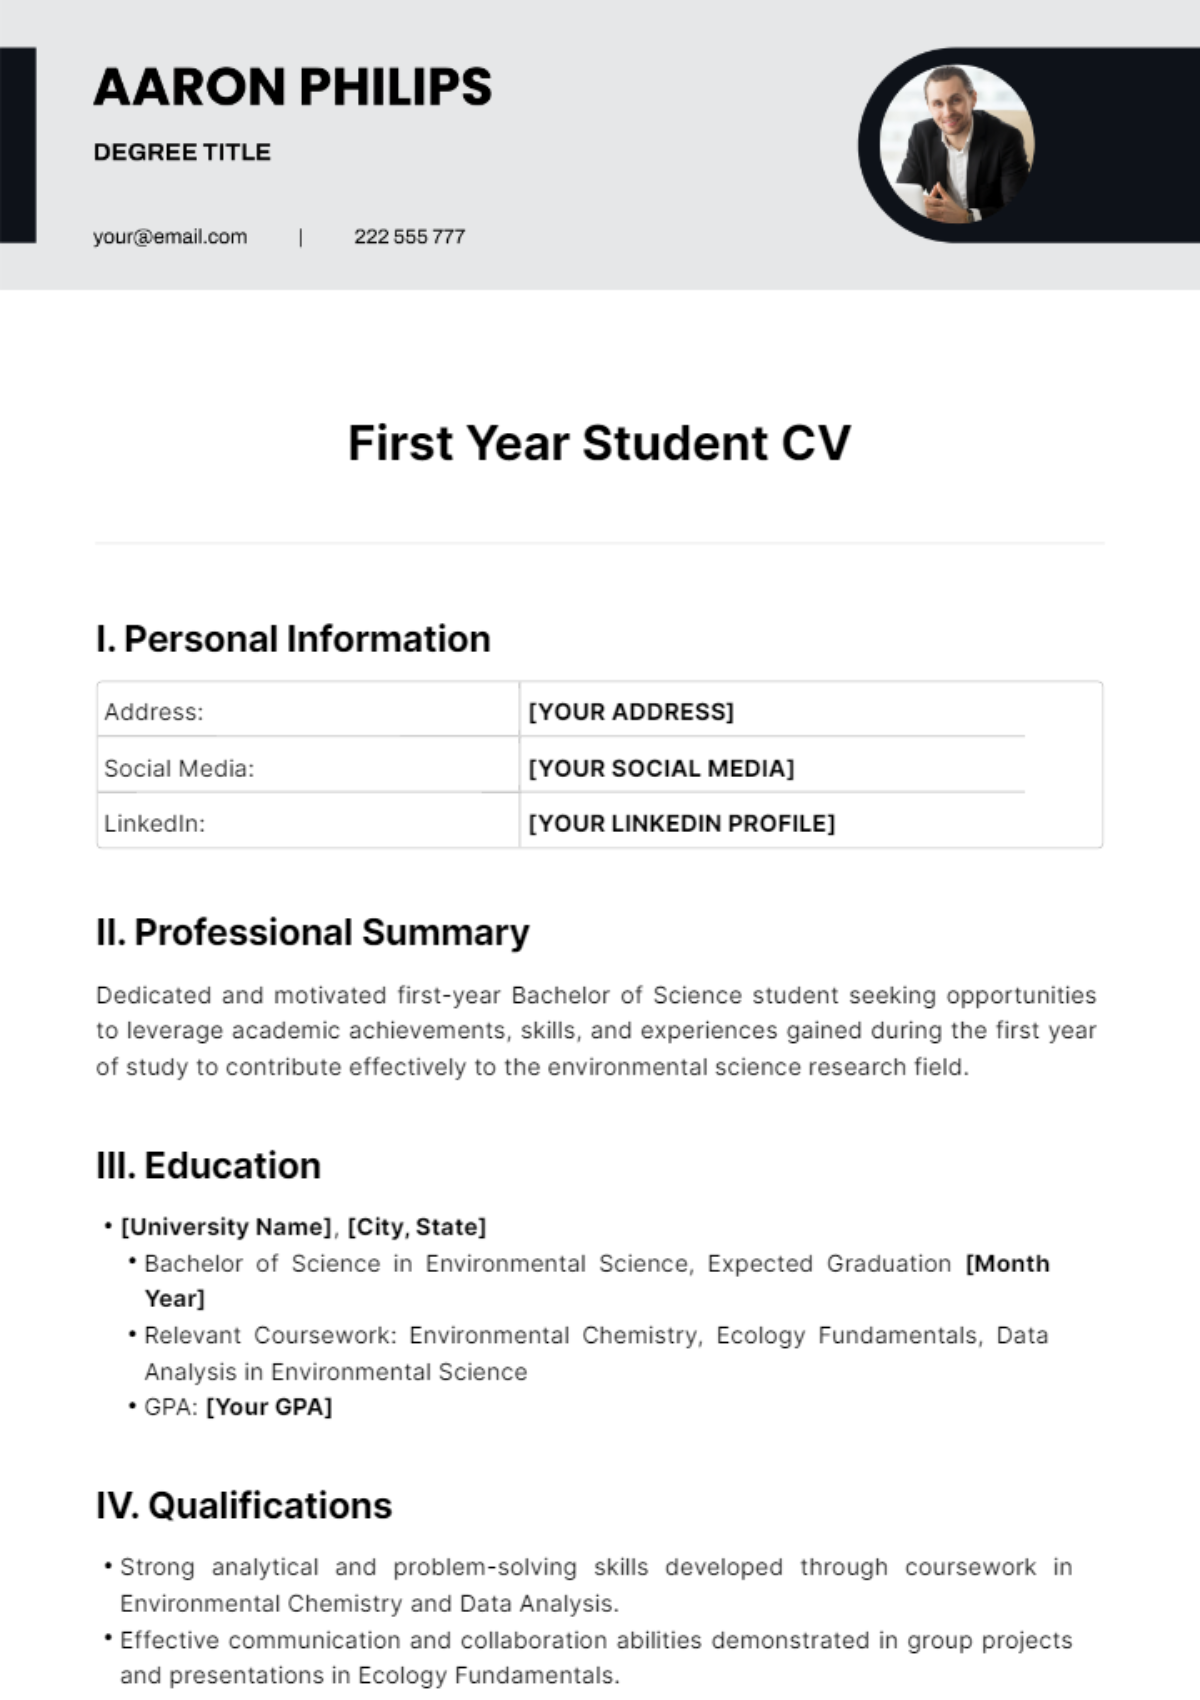 First Year Student CV Template